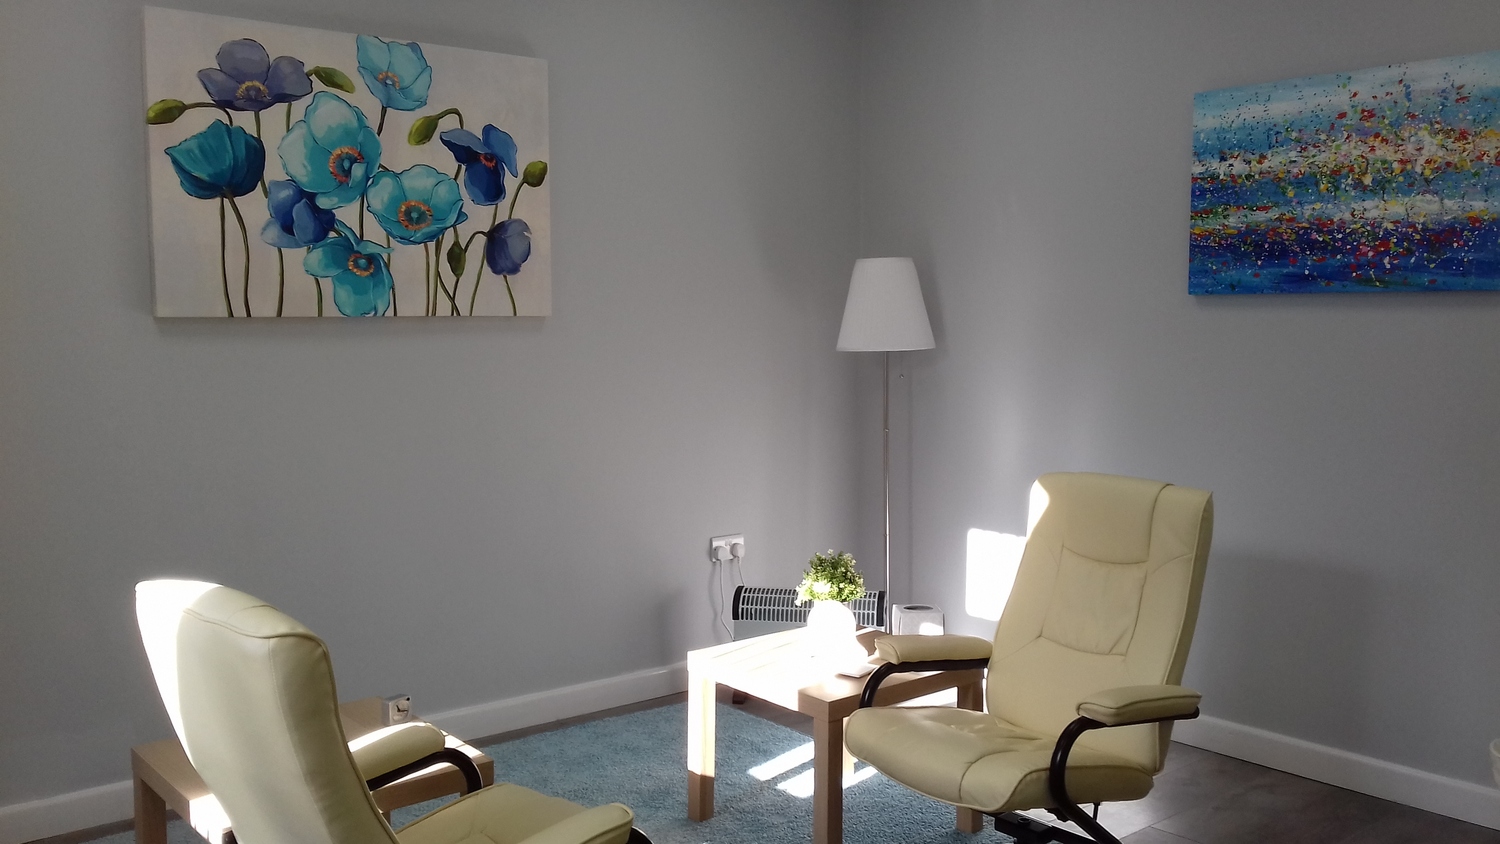 Gallery Photo of The Blue Therapy Room. One of our four bespoke therapy rooms at The Prestwich Holistic Centre.